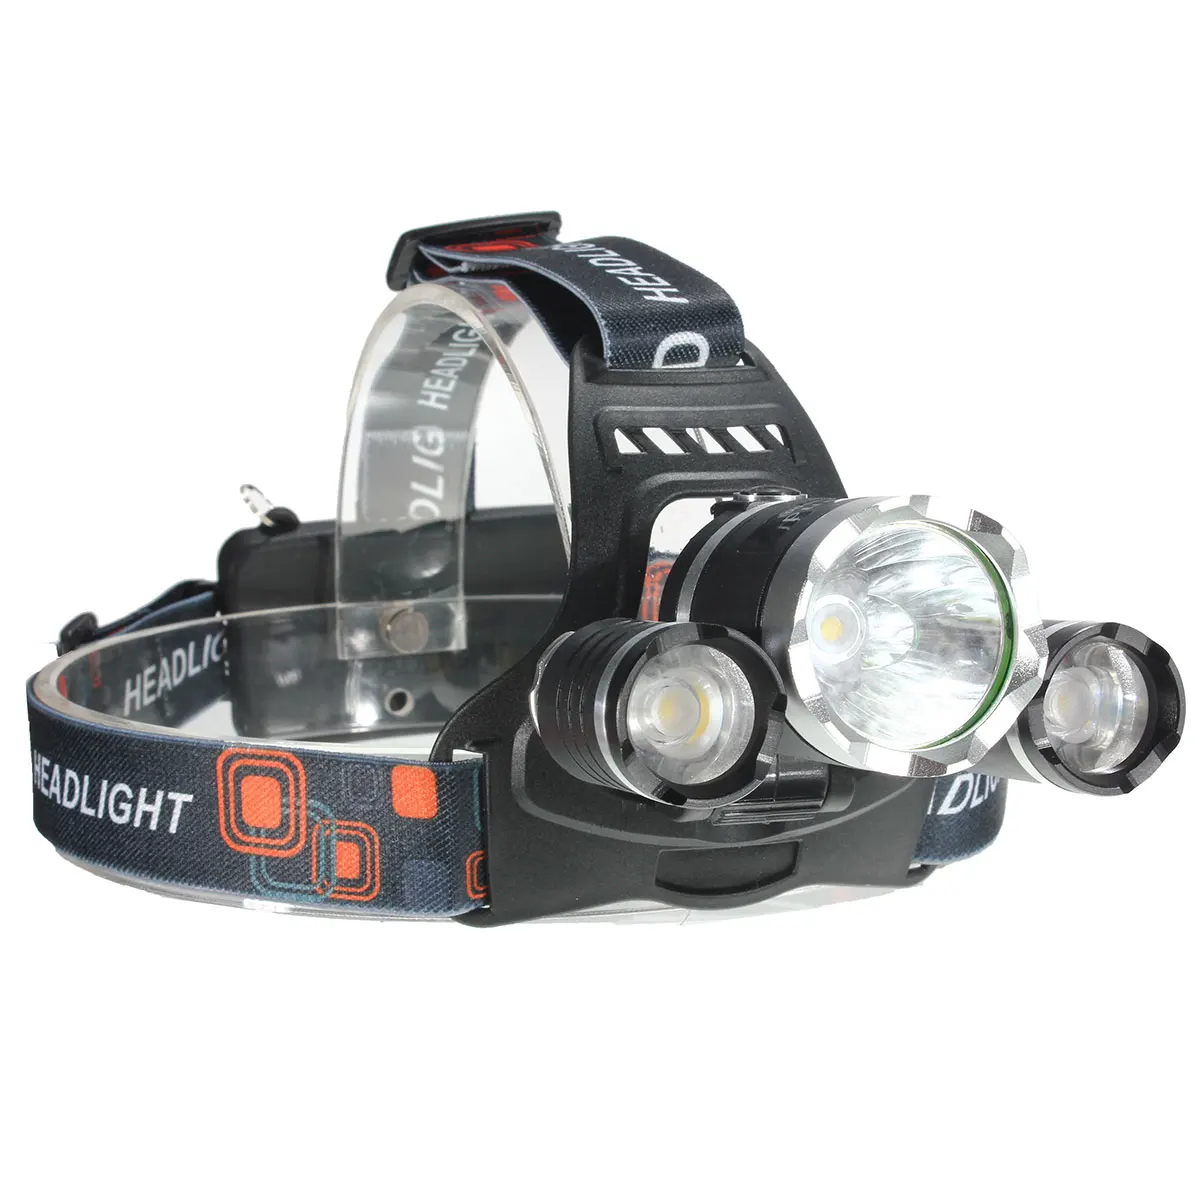 Jiguoor 5000LM XM-L T6 LED Rechargeable Headlamp Headlight Torch For Camping Hunting Fishing Head Torch Light by 18650 Battery